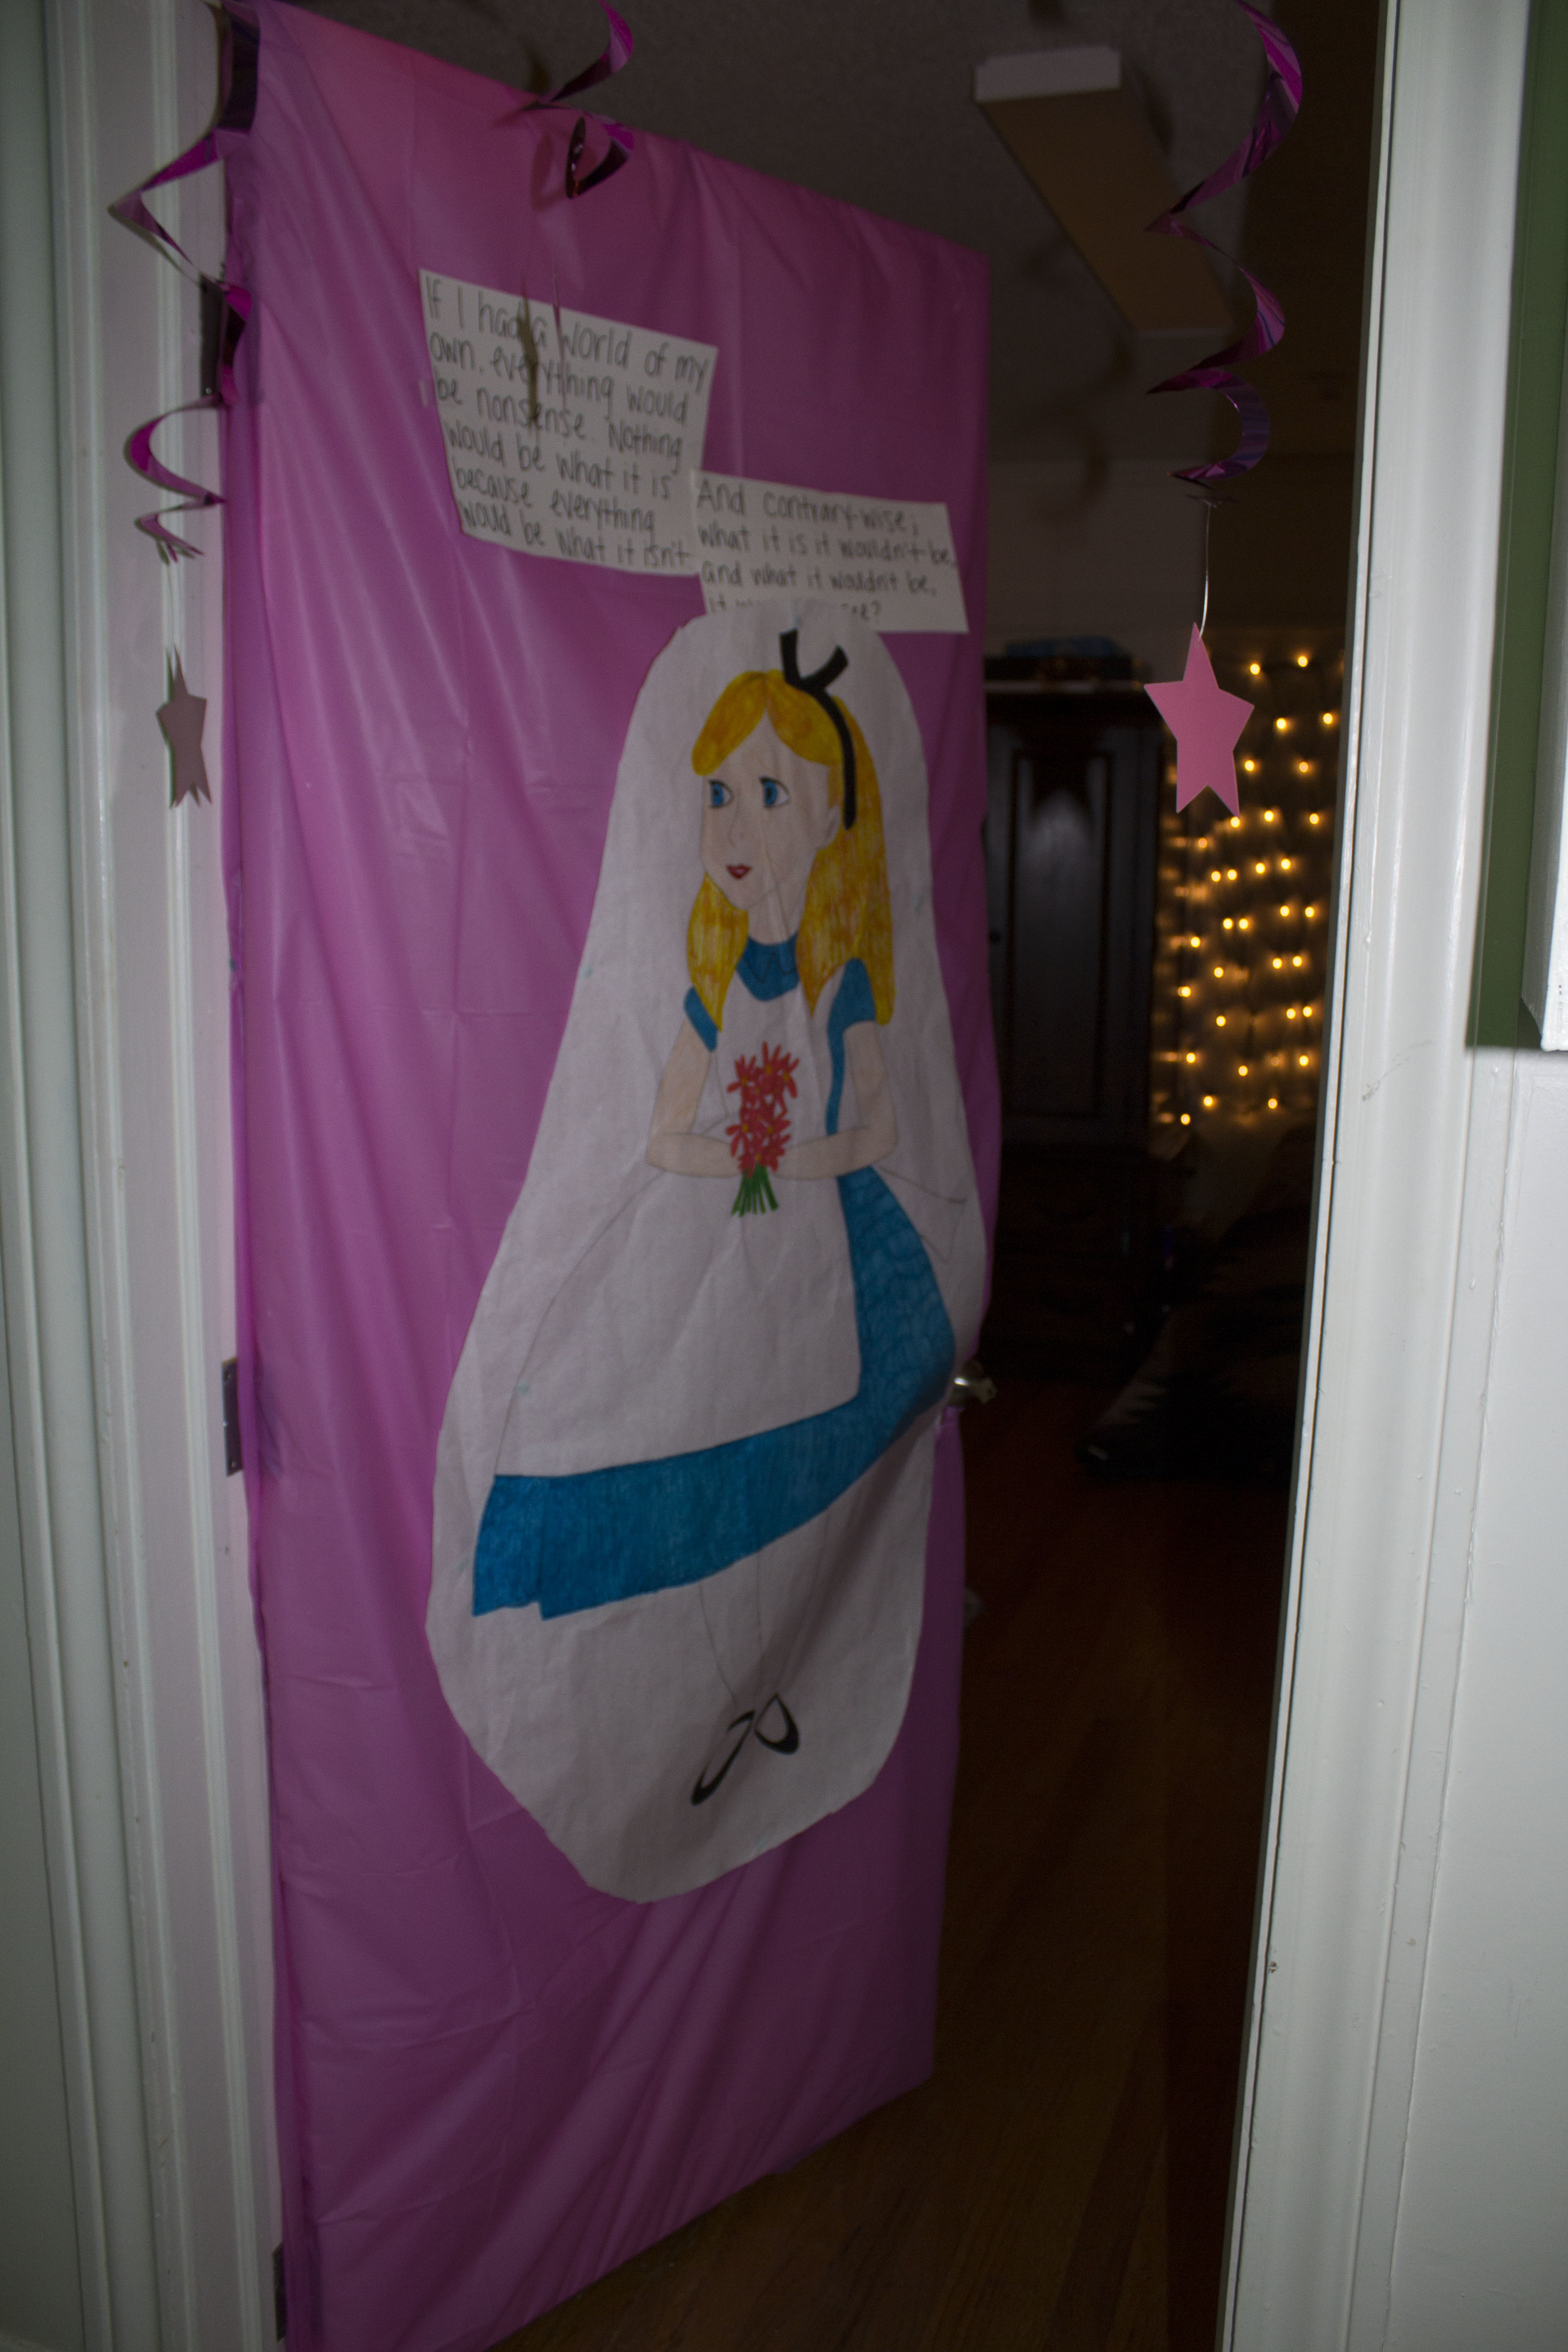  Chinquapin 8 decorated their dorm with an Alice in Wonderland theme. 